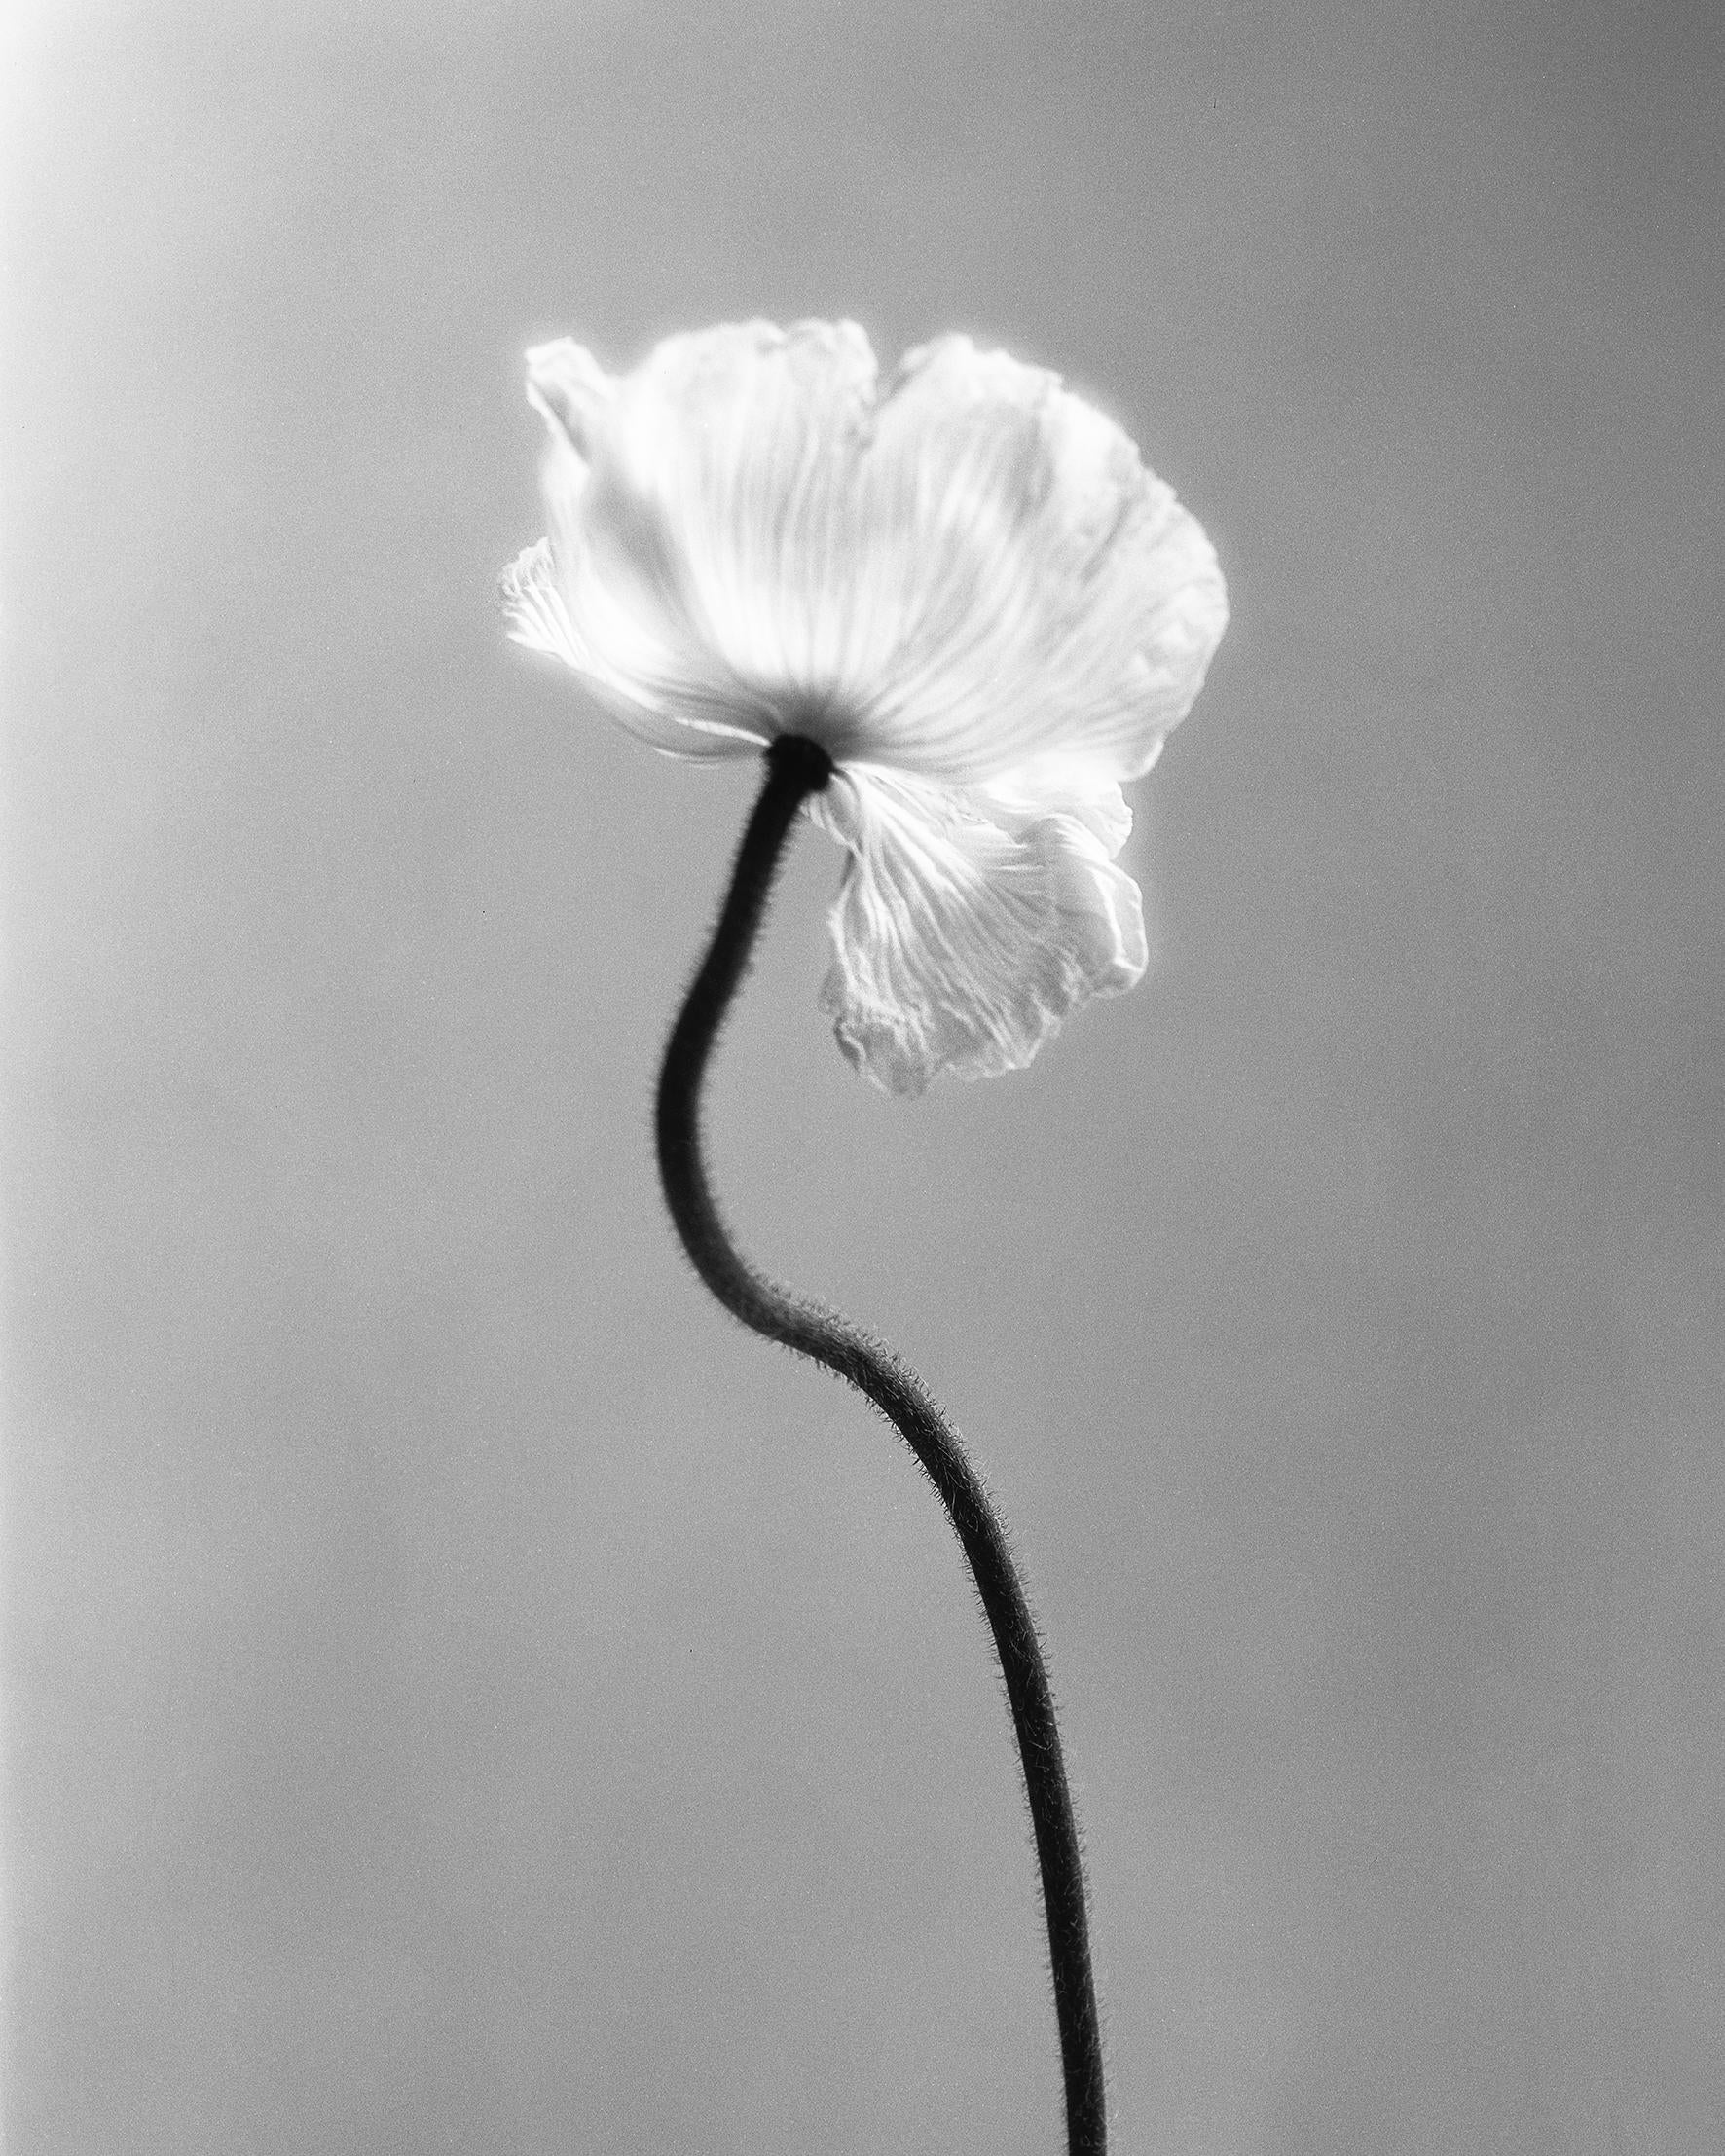 Ugne Pouwell Still-Life Photograph - Poppy No.3 - Analogue black and white floral photography, Limited edition of 15.